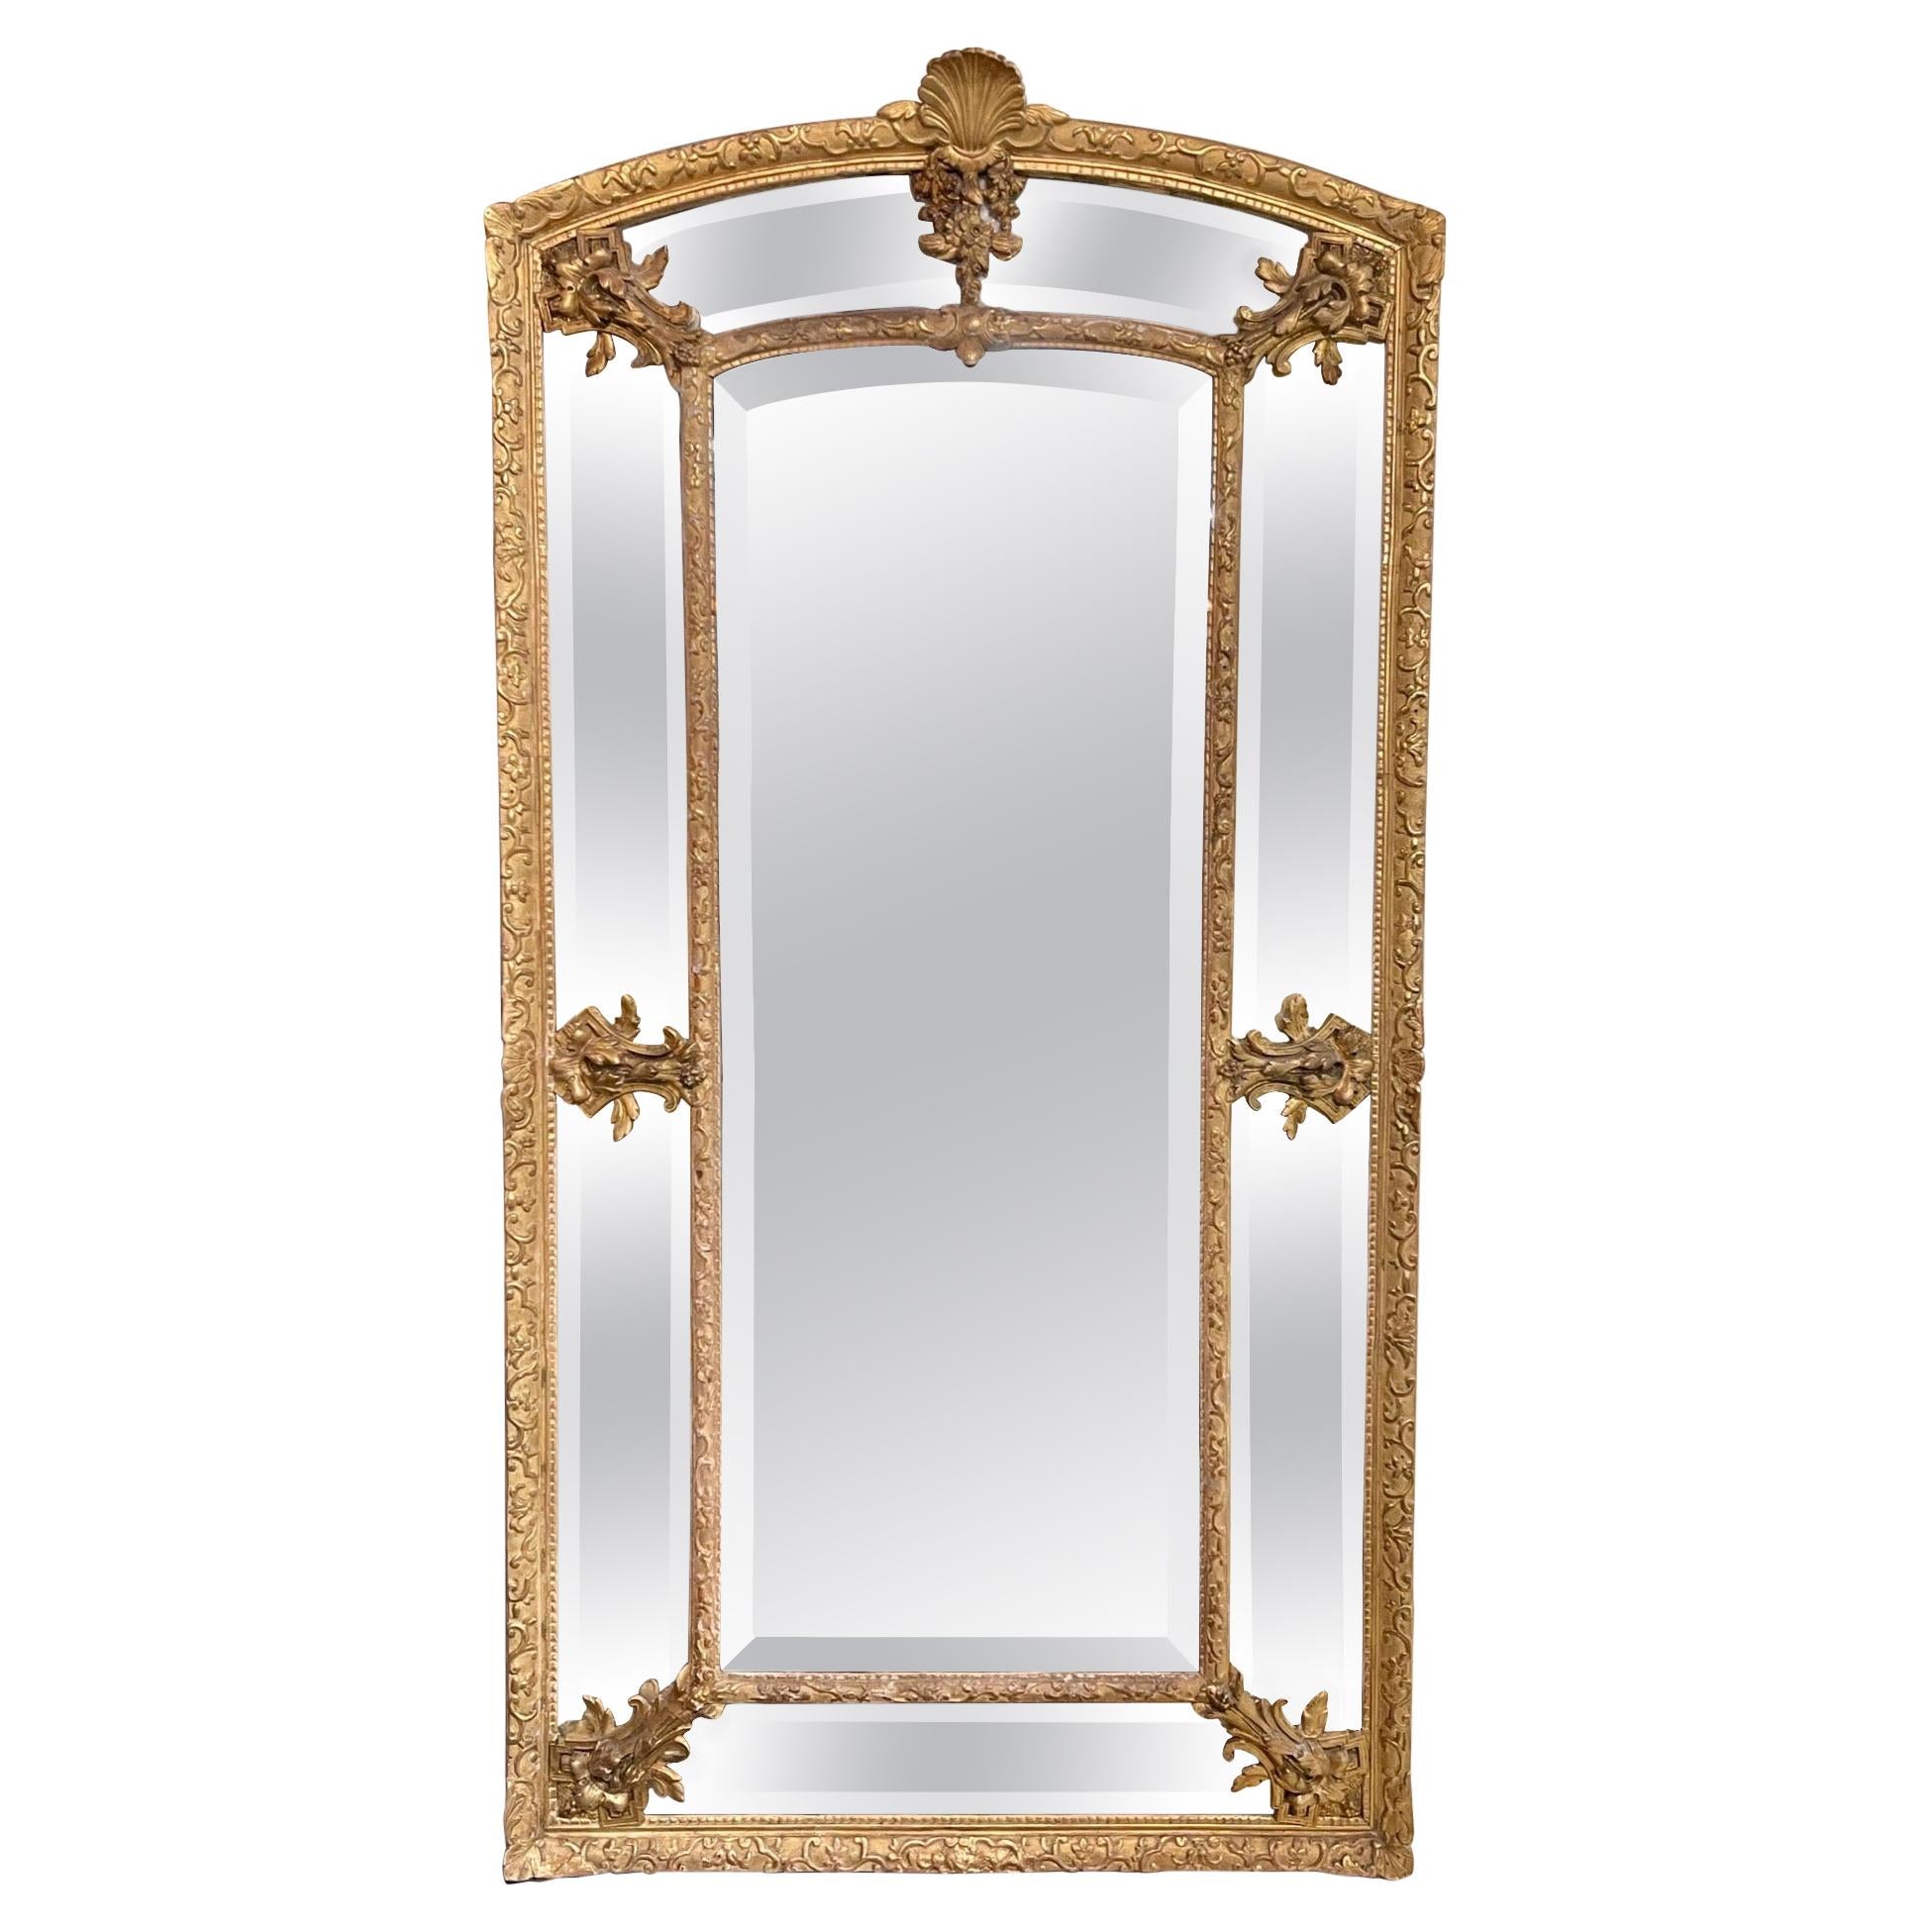 19th Century French Louis XVI Style Giltwood Cushion Mirror with Glass Panels